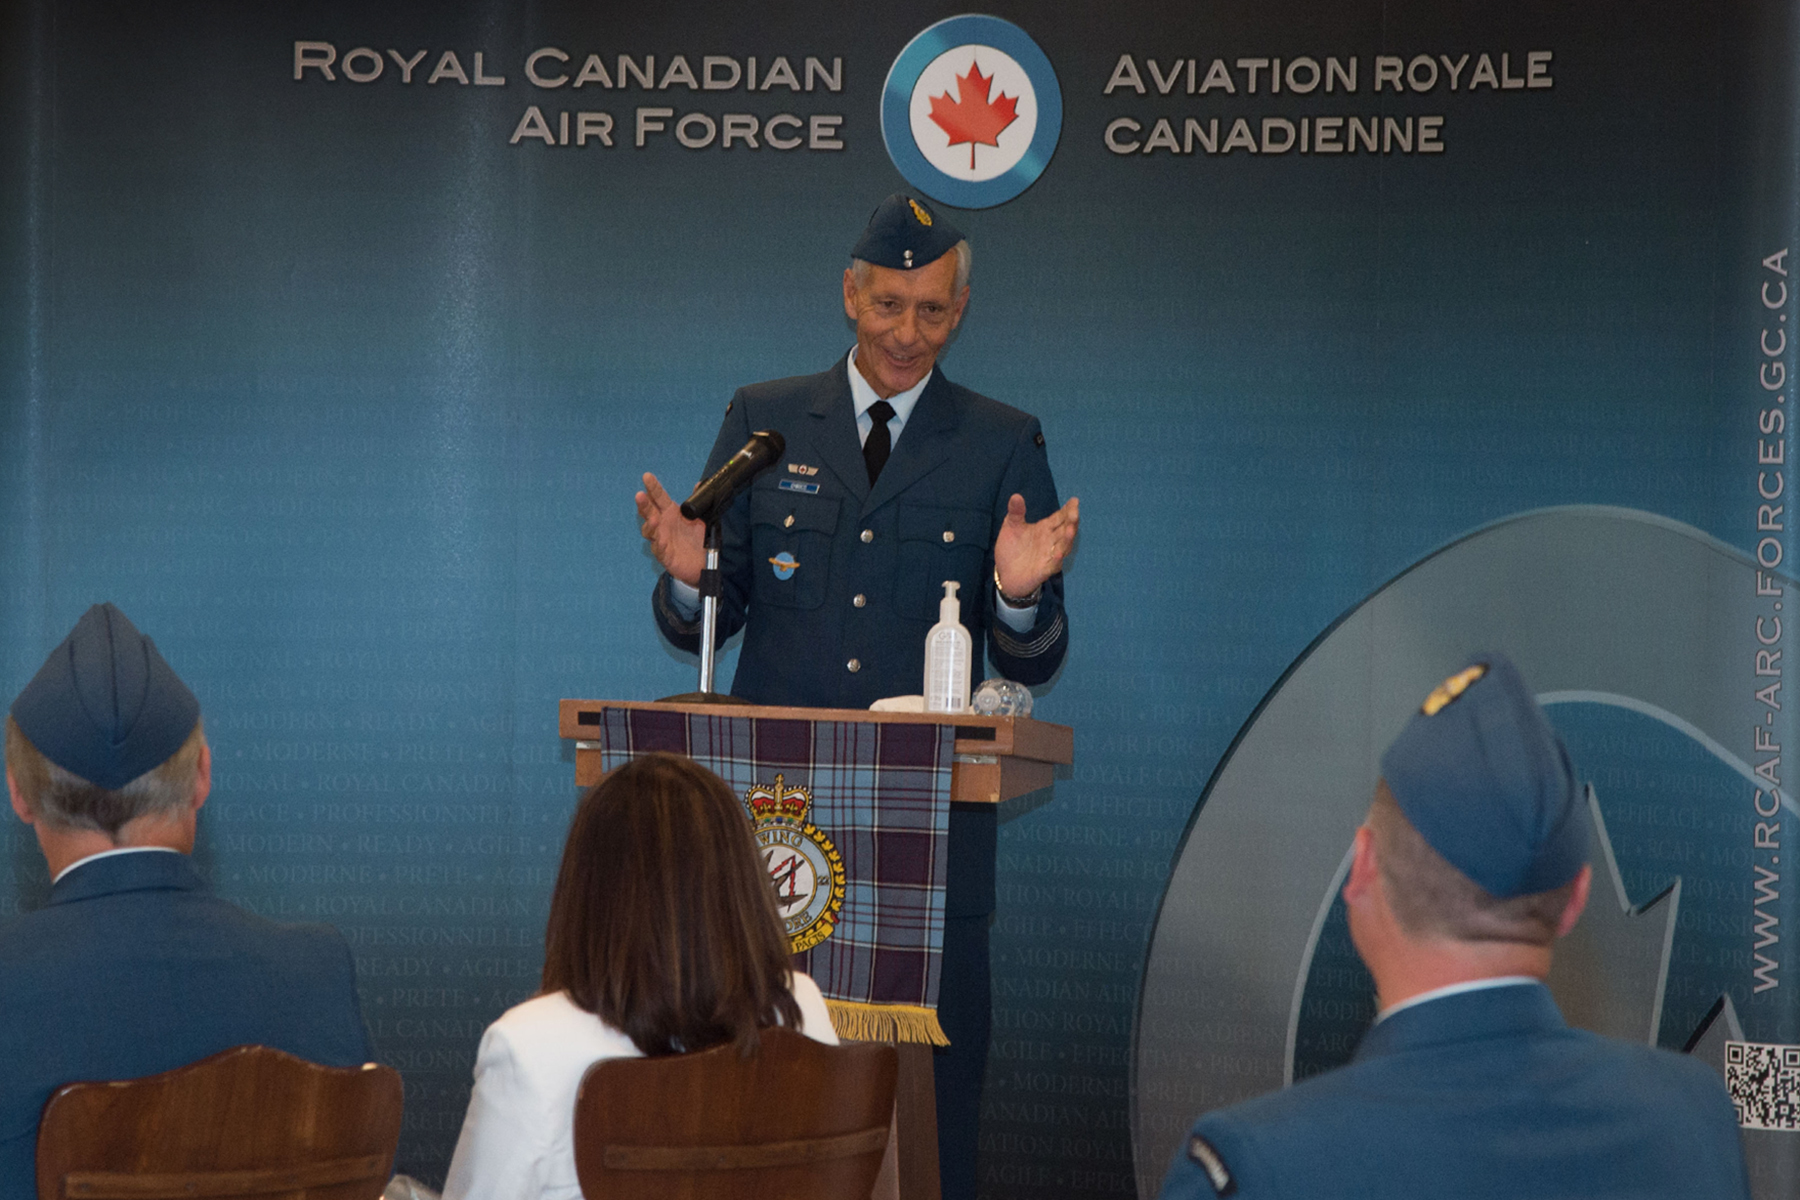 Peter Chirico addresses the audience on July 23, 2020, during his welcoming ceremony as 22 Wing North Bay’s new honorary colonel. Mr. Chirico is president and CEO of the North Bay & District Chamber of Commerce. He assumed the role in April 2017 and was a senior commercial banker for over 32 years. PHOTO: Corporal Rob Ouellette